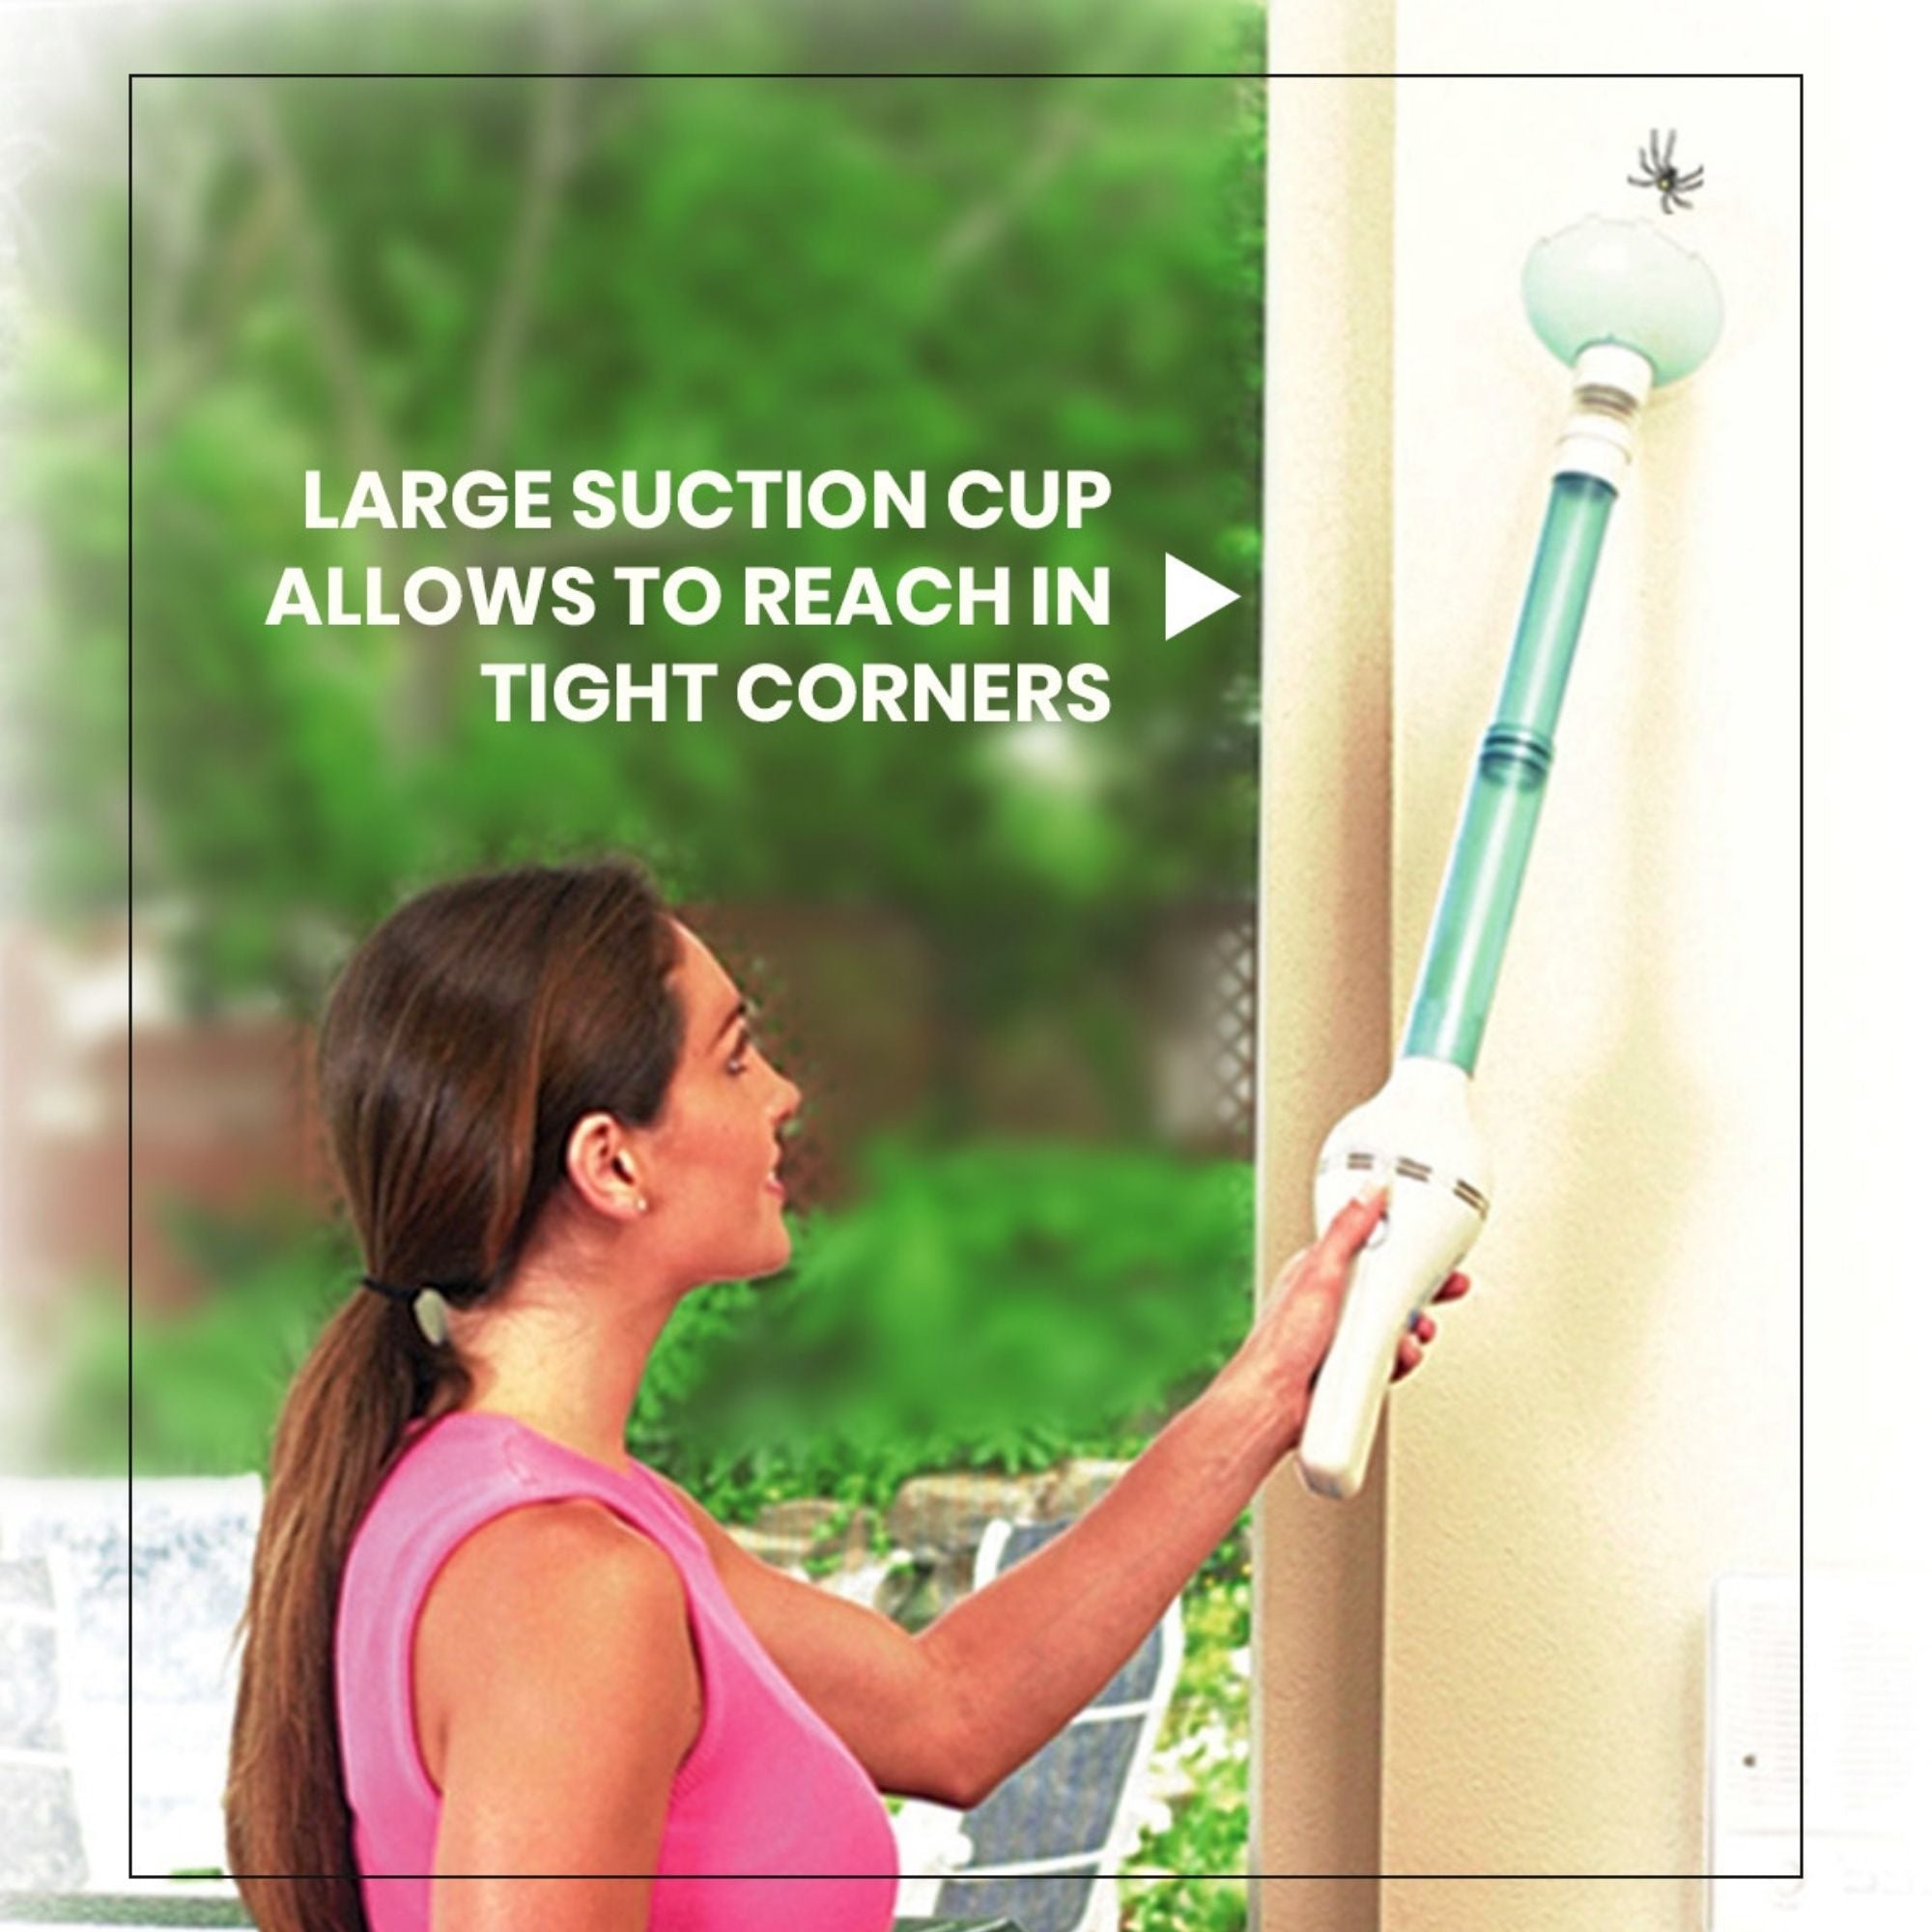 Lifestyle image of a person with light skin, long dark brown hair in a ponytail, and a pink sleeveless shirt using the bug vacuum to capture a spider high up on a beige wall beside a large exterior window showing a green space outdoors. Text overlay reads, "Large suction cup allows to reach into tight corners"